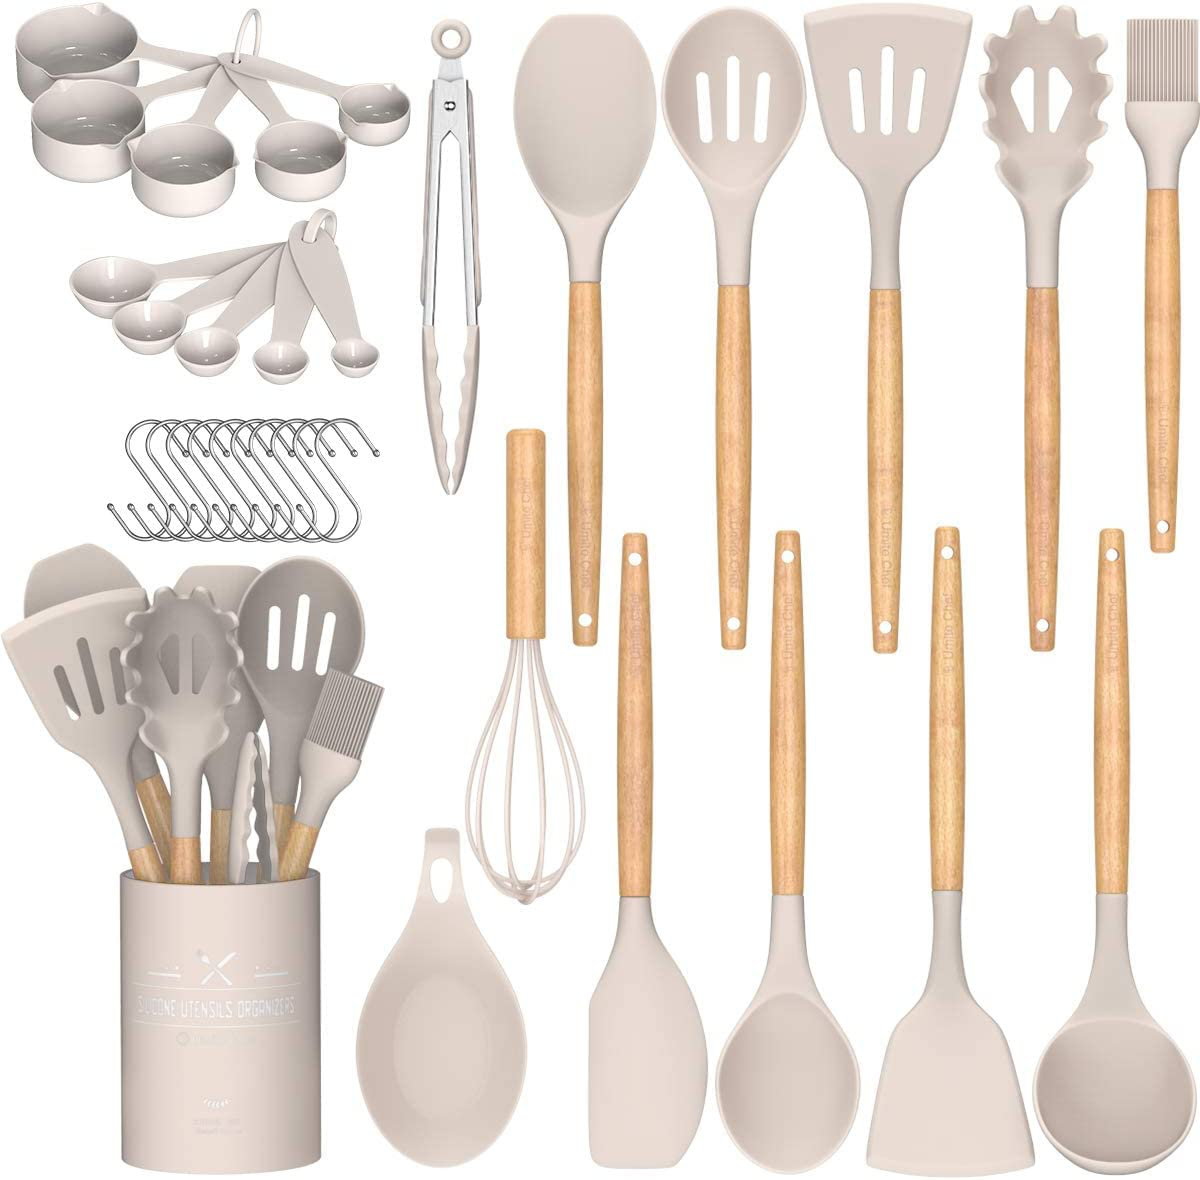 12pc Silicone Cooking Utensils Set Non-stick Spatula Shovel Soup Cooking  Tool With Wooden Handle Storage Box Kitchen Accessories - Cooking Tool Sets  - AliExpress